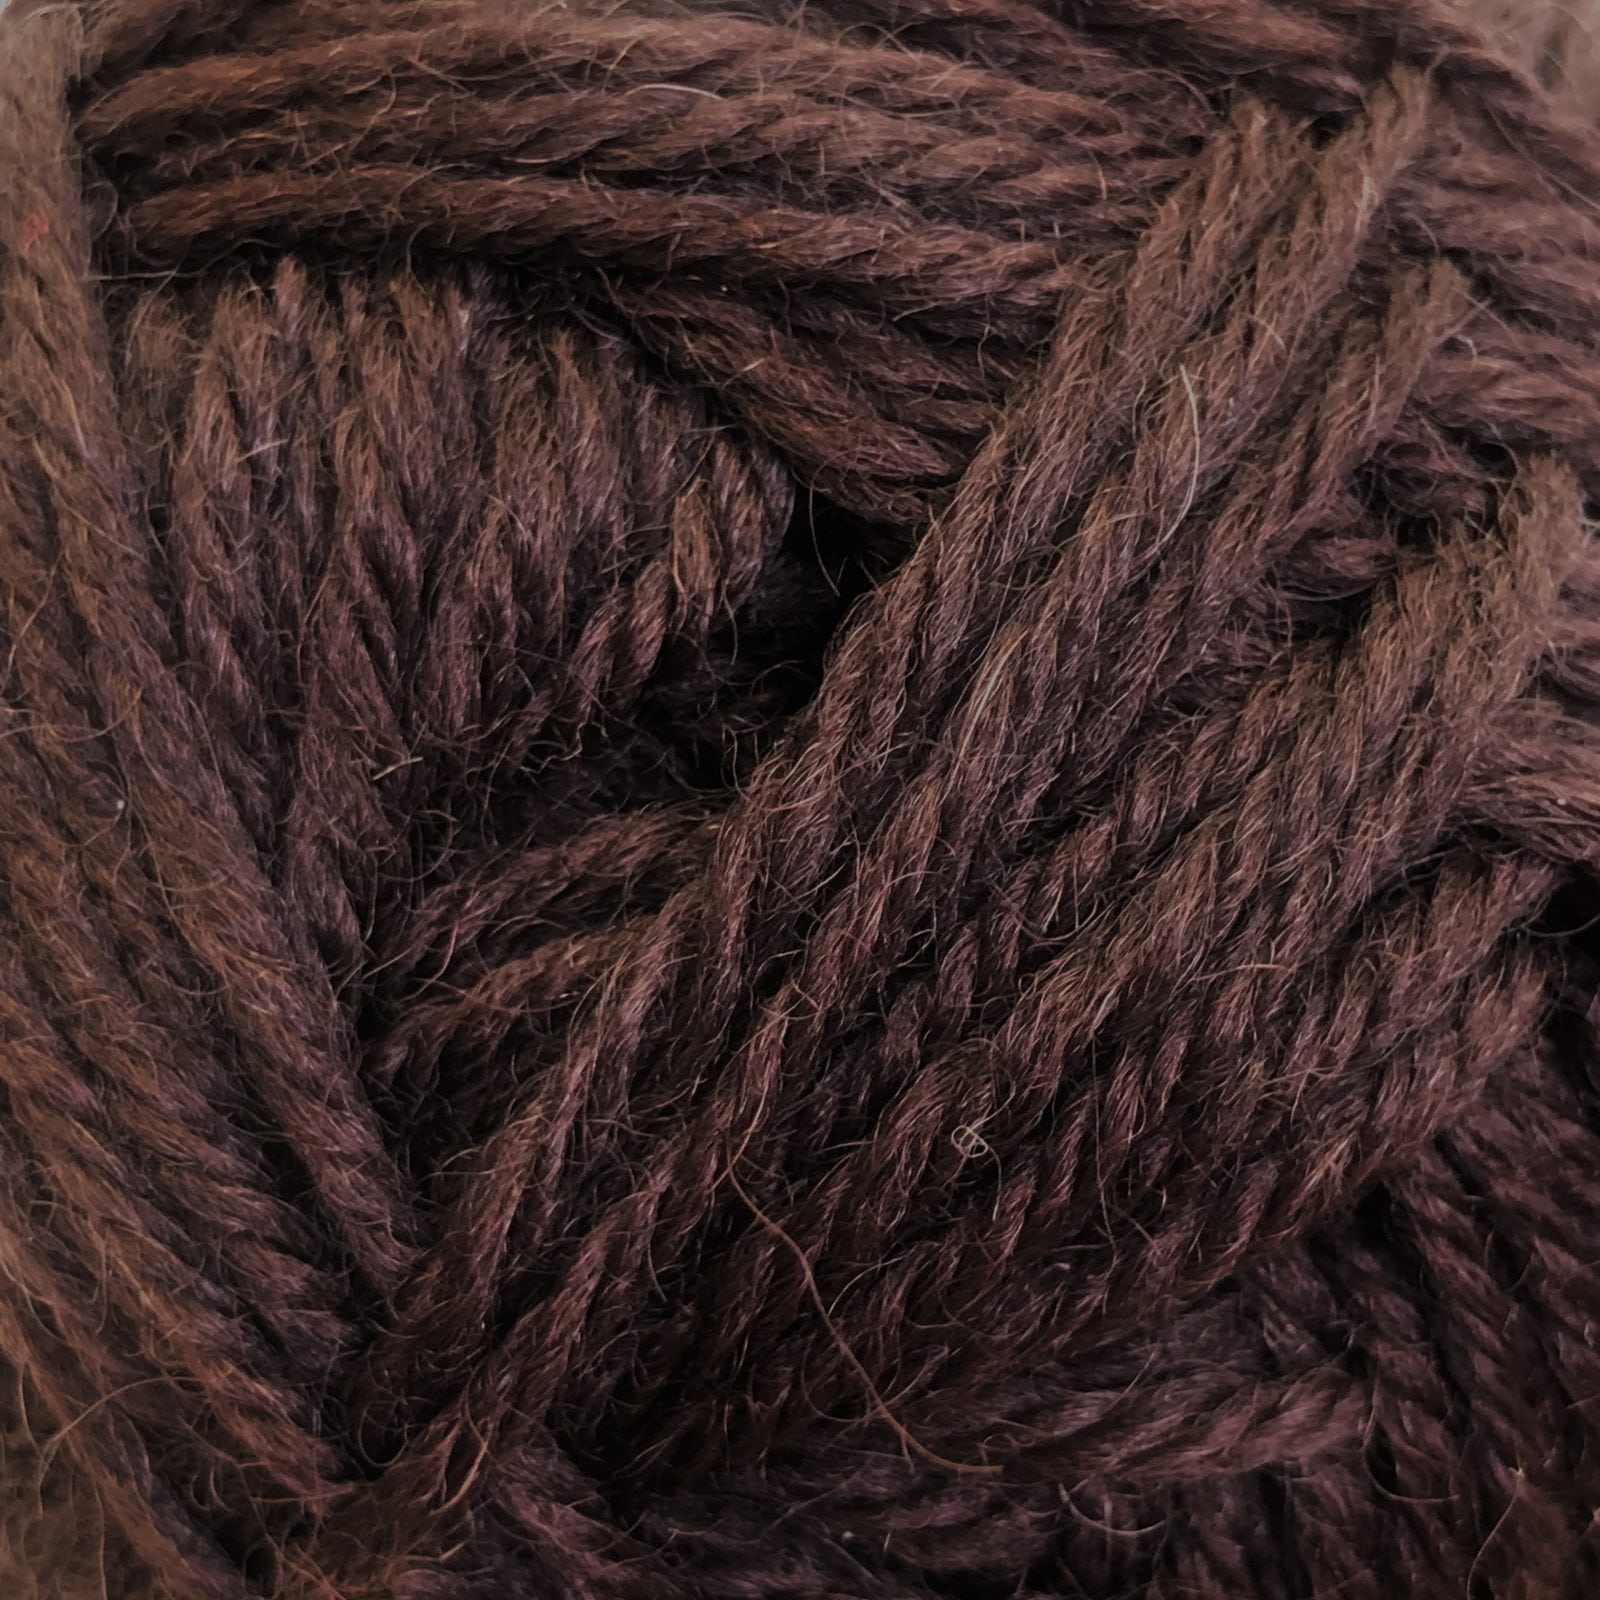 Countrywide Windsor 100% New Zealand wool yarn 8ply 8 ply double knit dk Dark Brown Shade 60